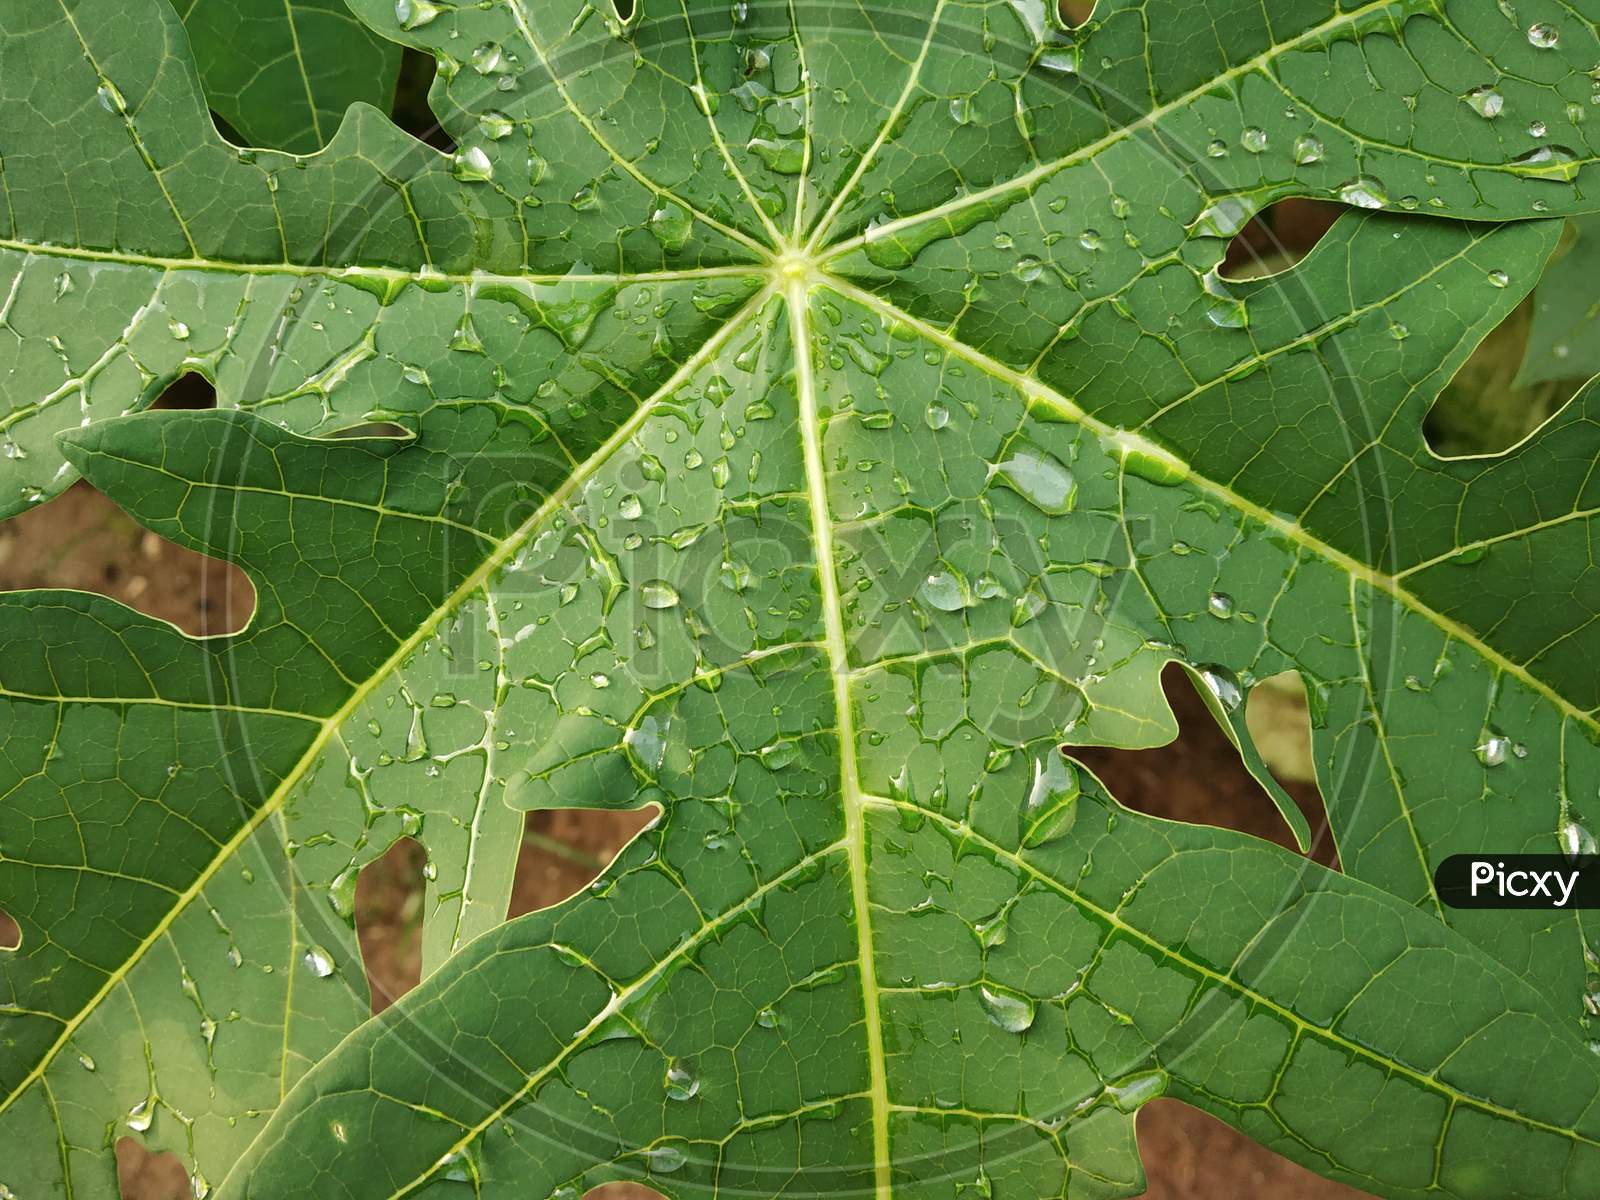 close up shot of papaya plant with rain drops on leaves after the rain